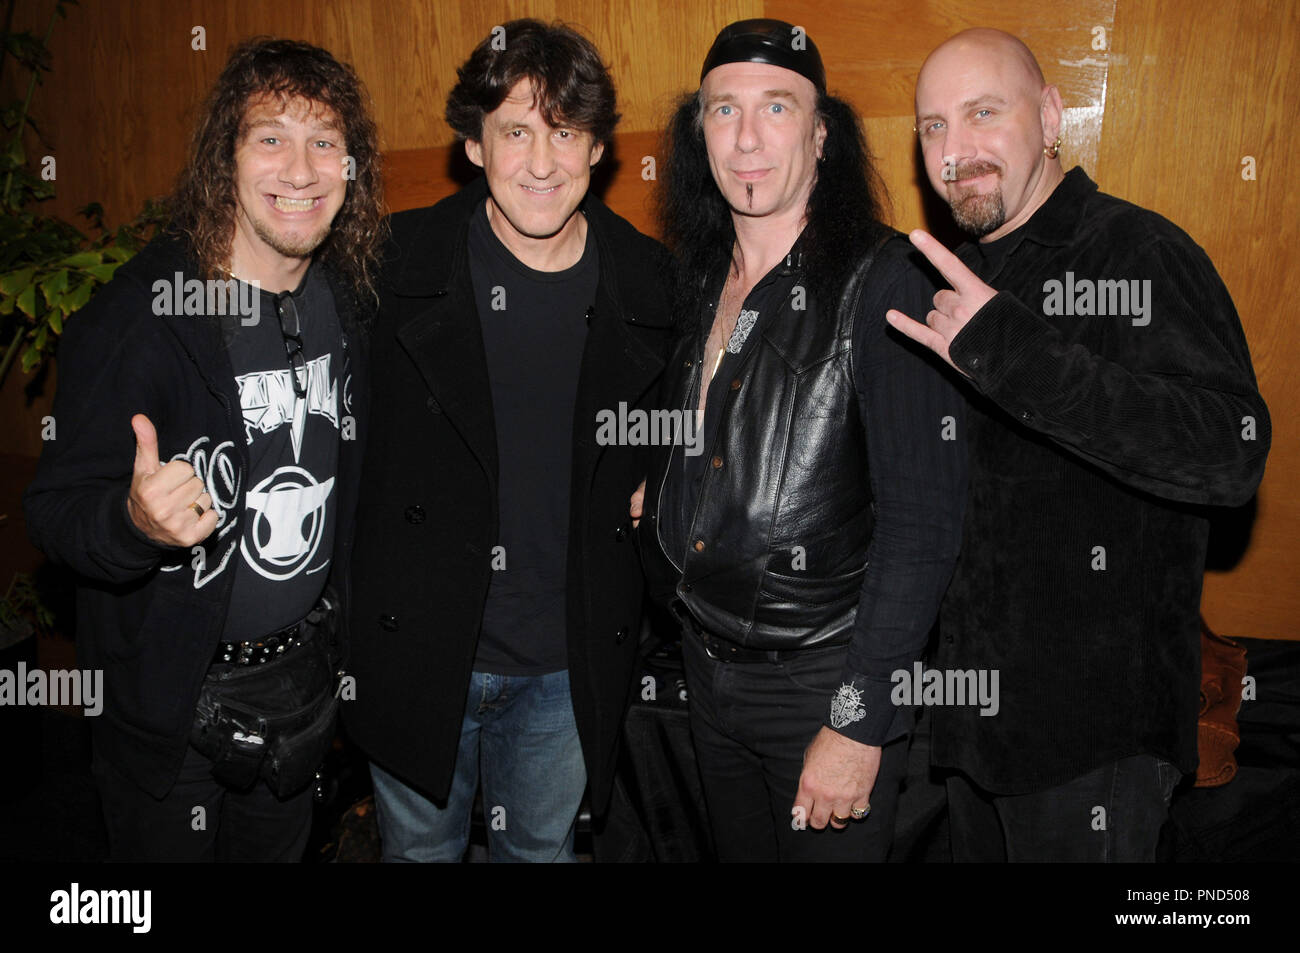 Cameron Crowe (second from left) with Anvilduring the reception of the DVD release of 'Anvil The Story of Anvil' held at the WGA in Beverly Hills, CA on Thursday, October 8, 2009. Photo by Richard Soria/ PRPP /PictureLux File Reference # CameronCroweAnvil01 10809PRPP  For Editorial Use Only -  All Rights Reserved Stock Photo